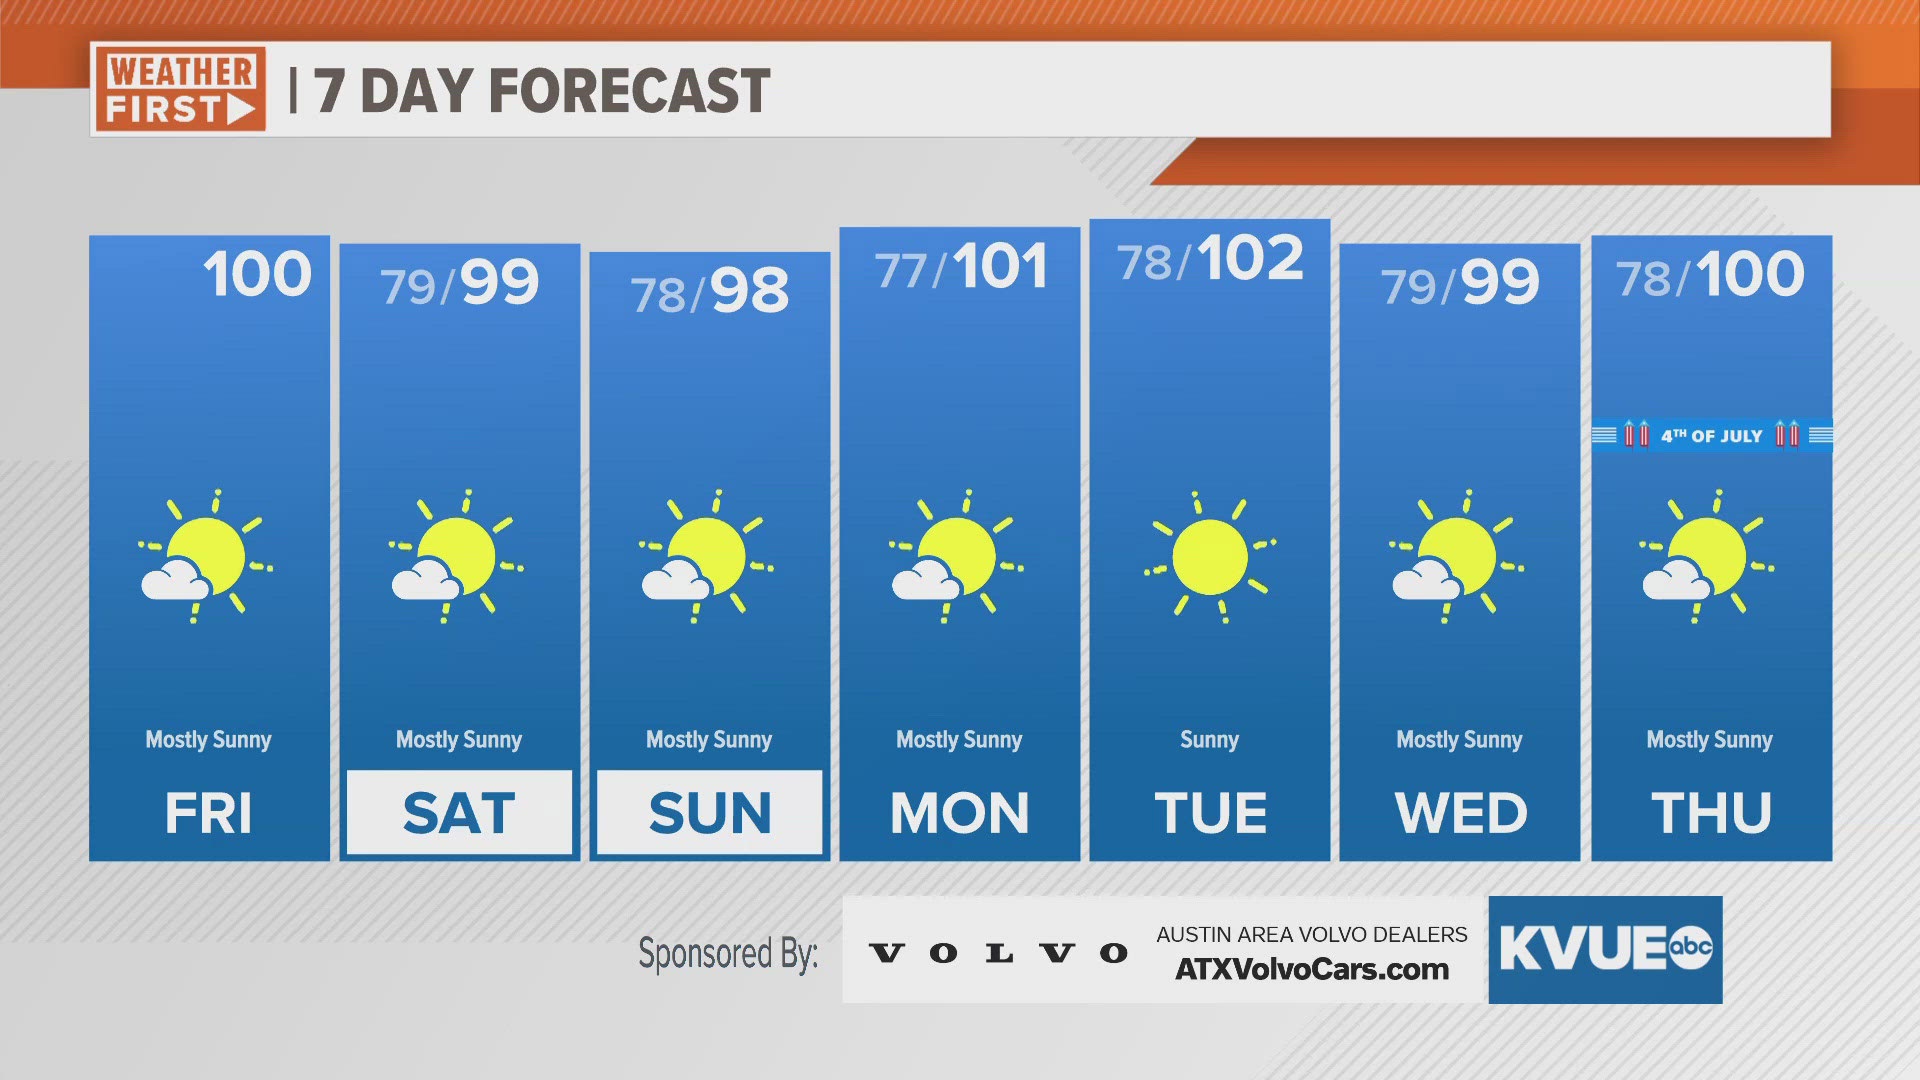 Triple-digit heat possible once again for Austin on Friday